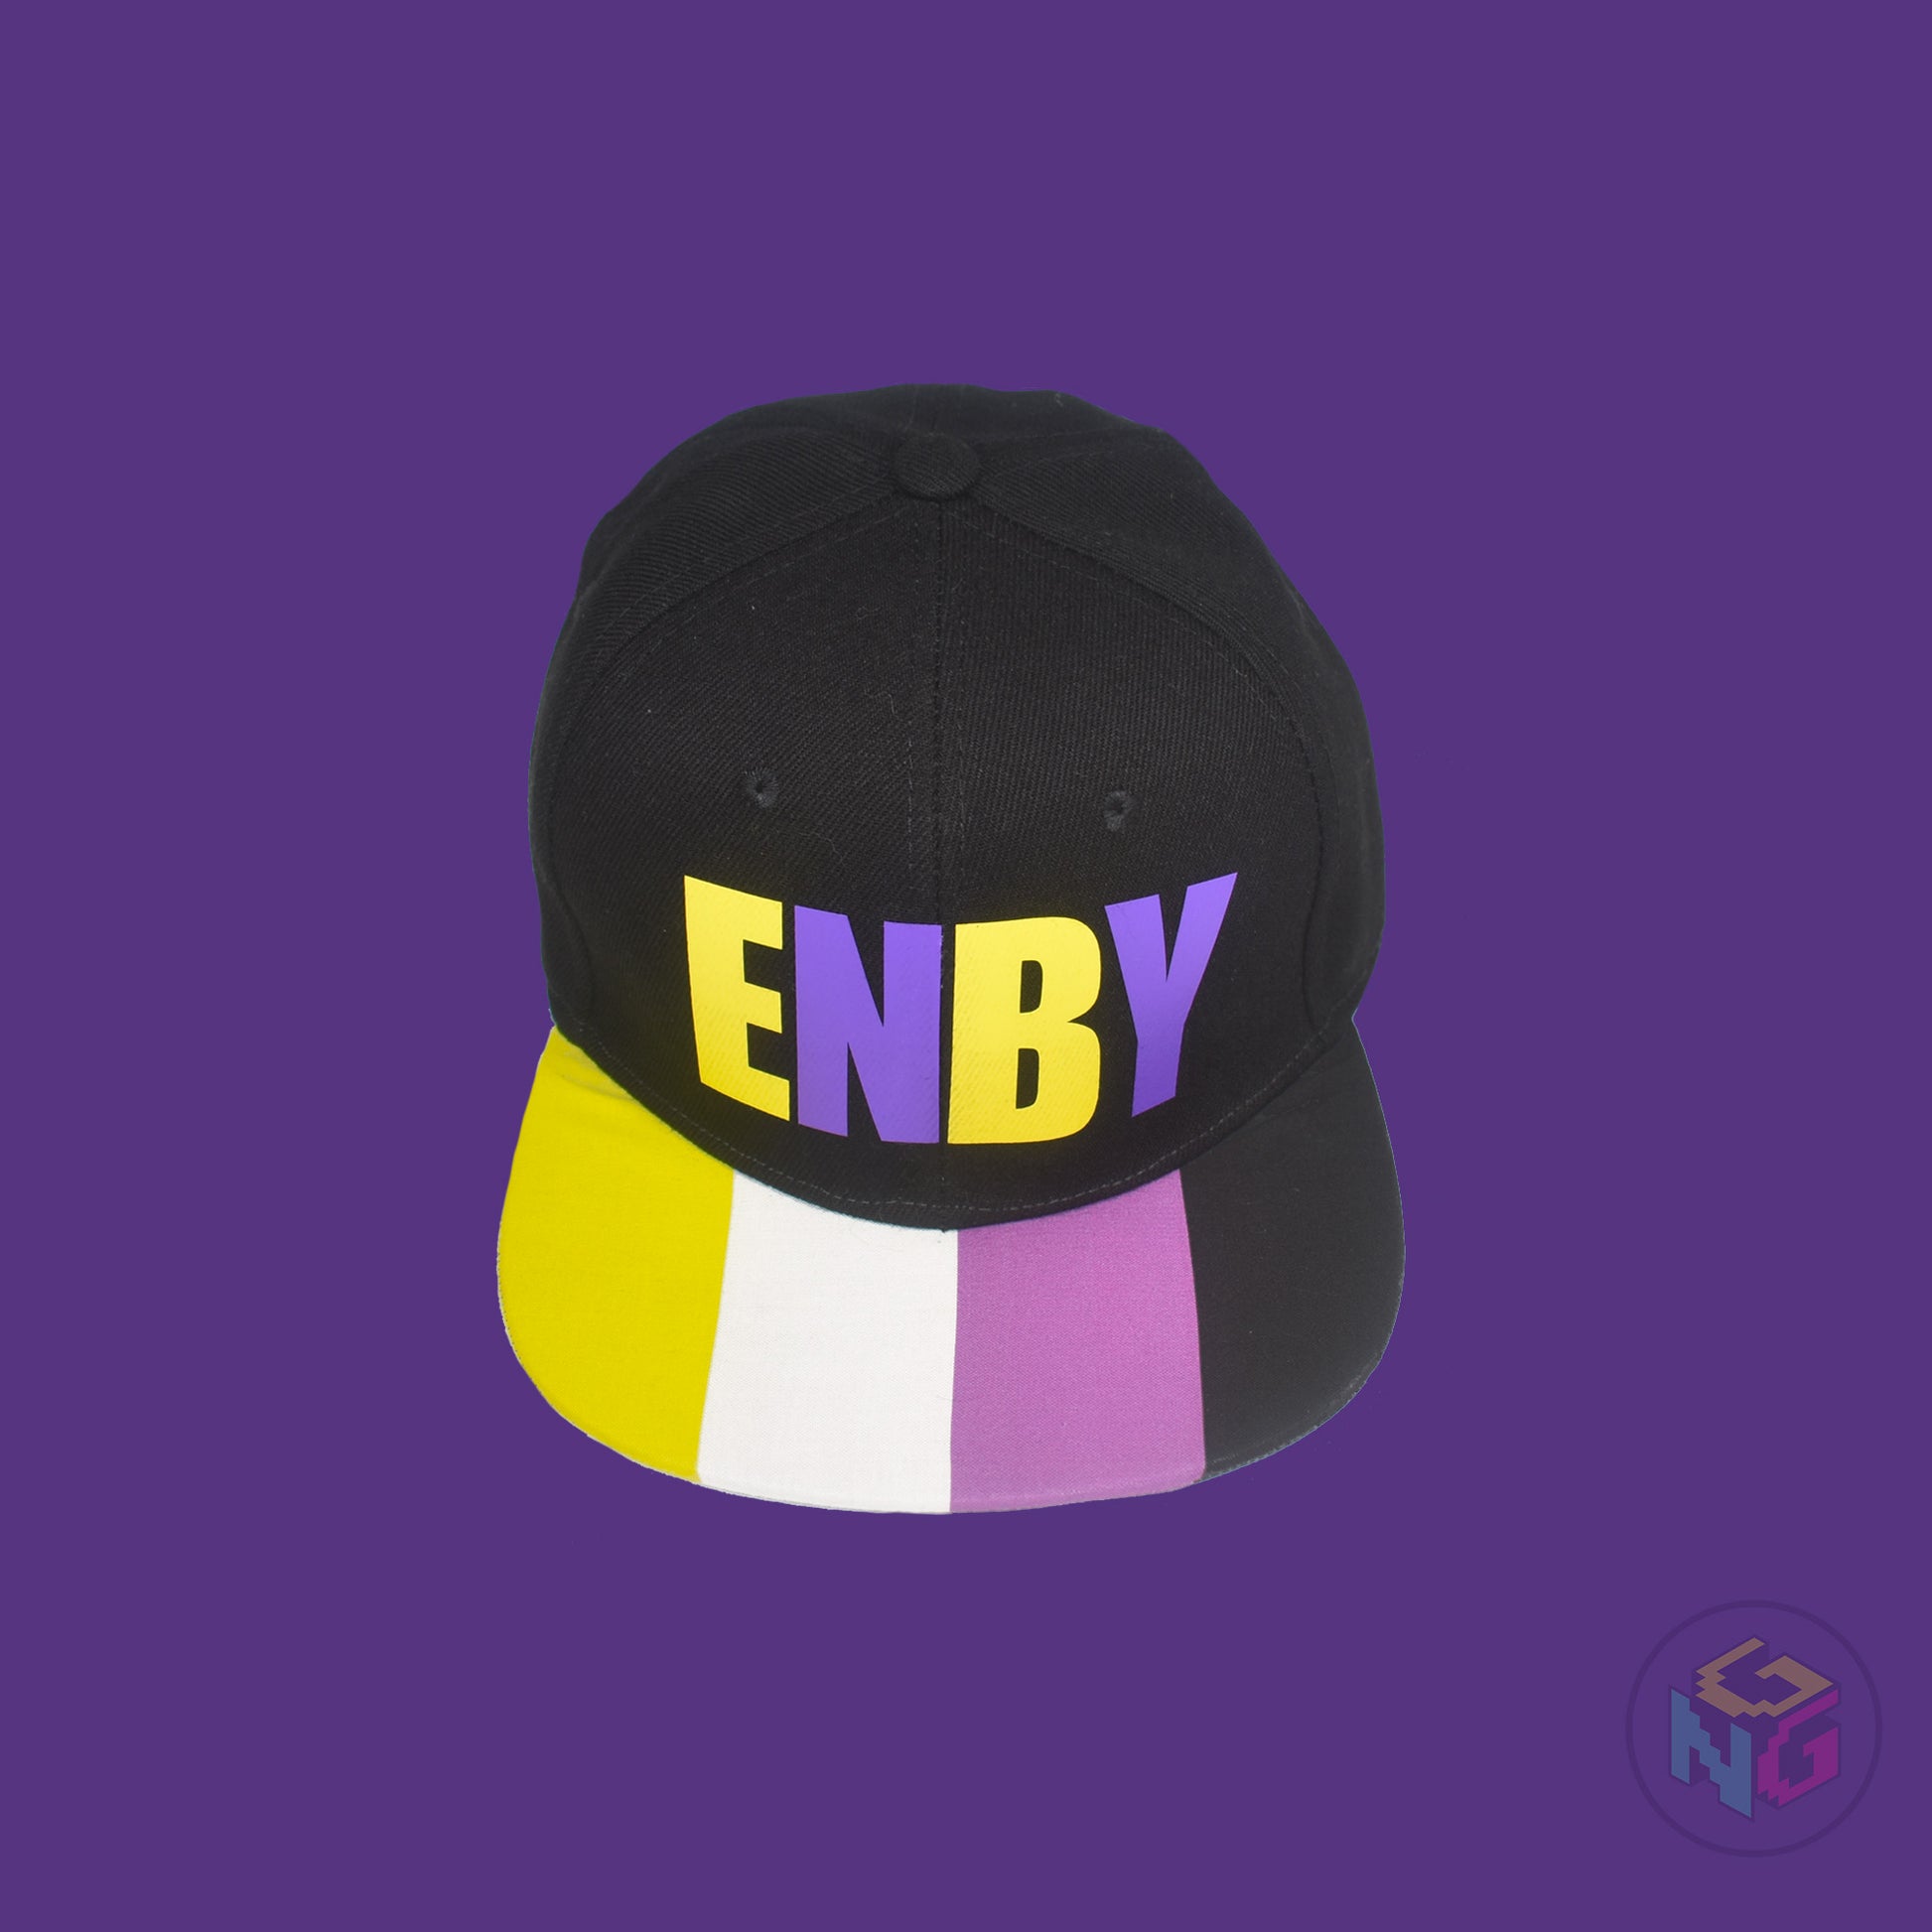 Black flat bill snapback hat. The brim has the nonbinary pride flag on both sides and the front of the hat has the word “ENBY” in yellow and purple letters. Front top view